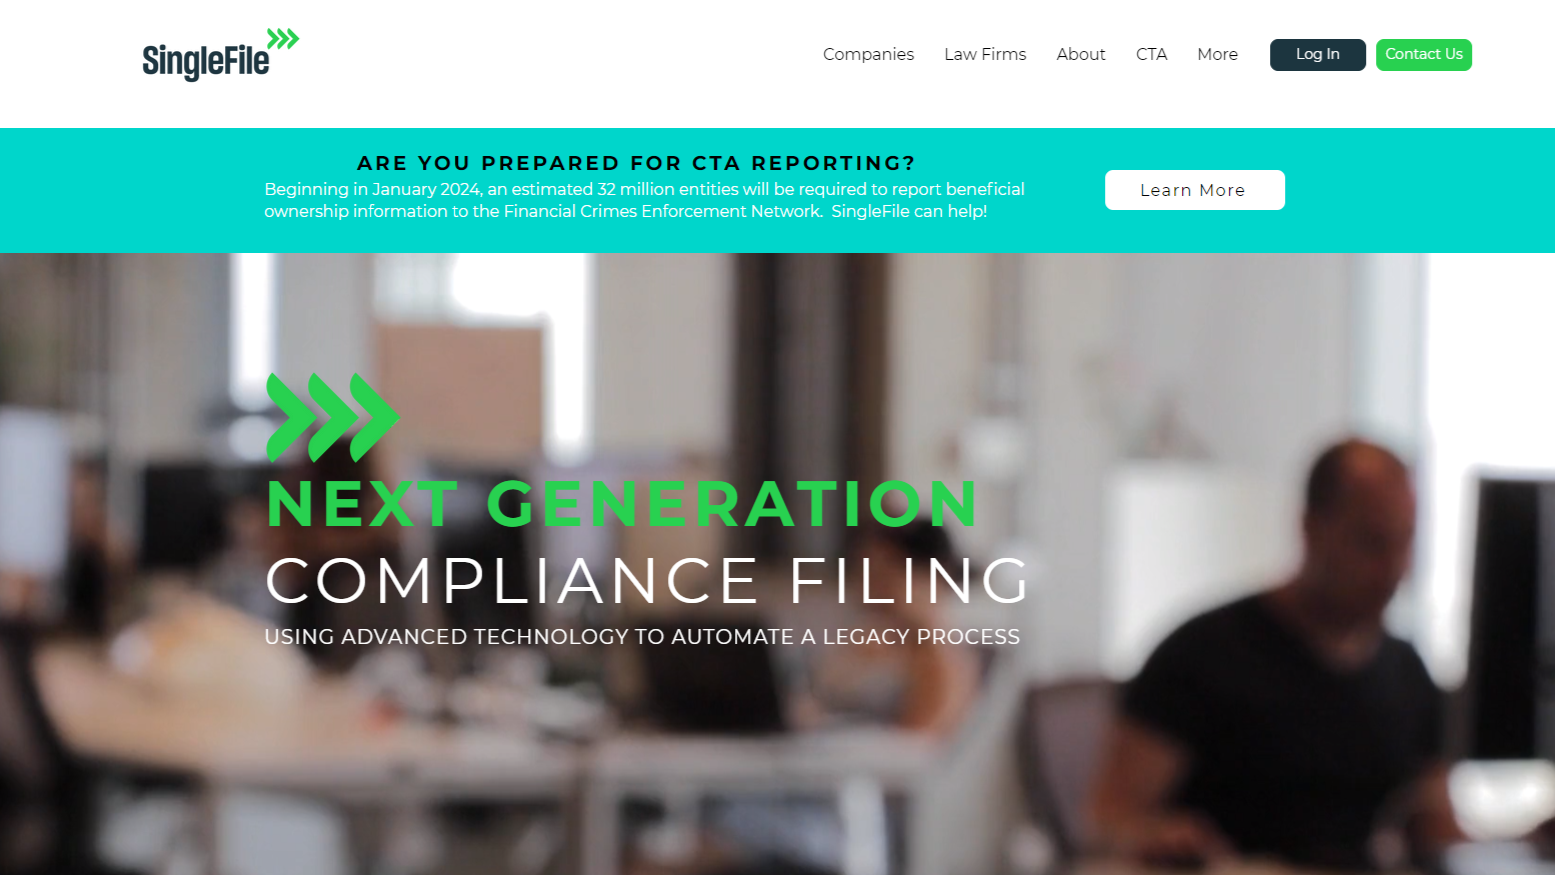 Aiming to Be the Stripe of Corporate Compliance Filing, SingleFile Raises $6.5M, For Total Funding of $15.1M